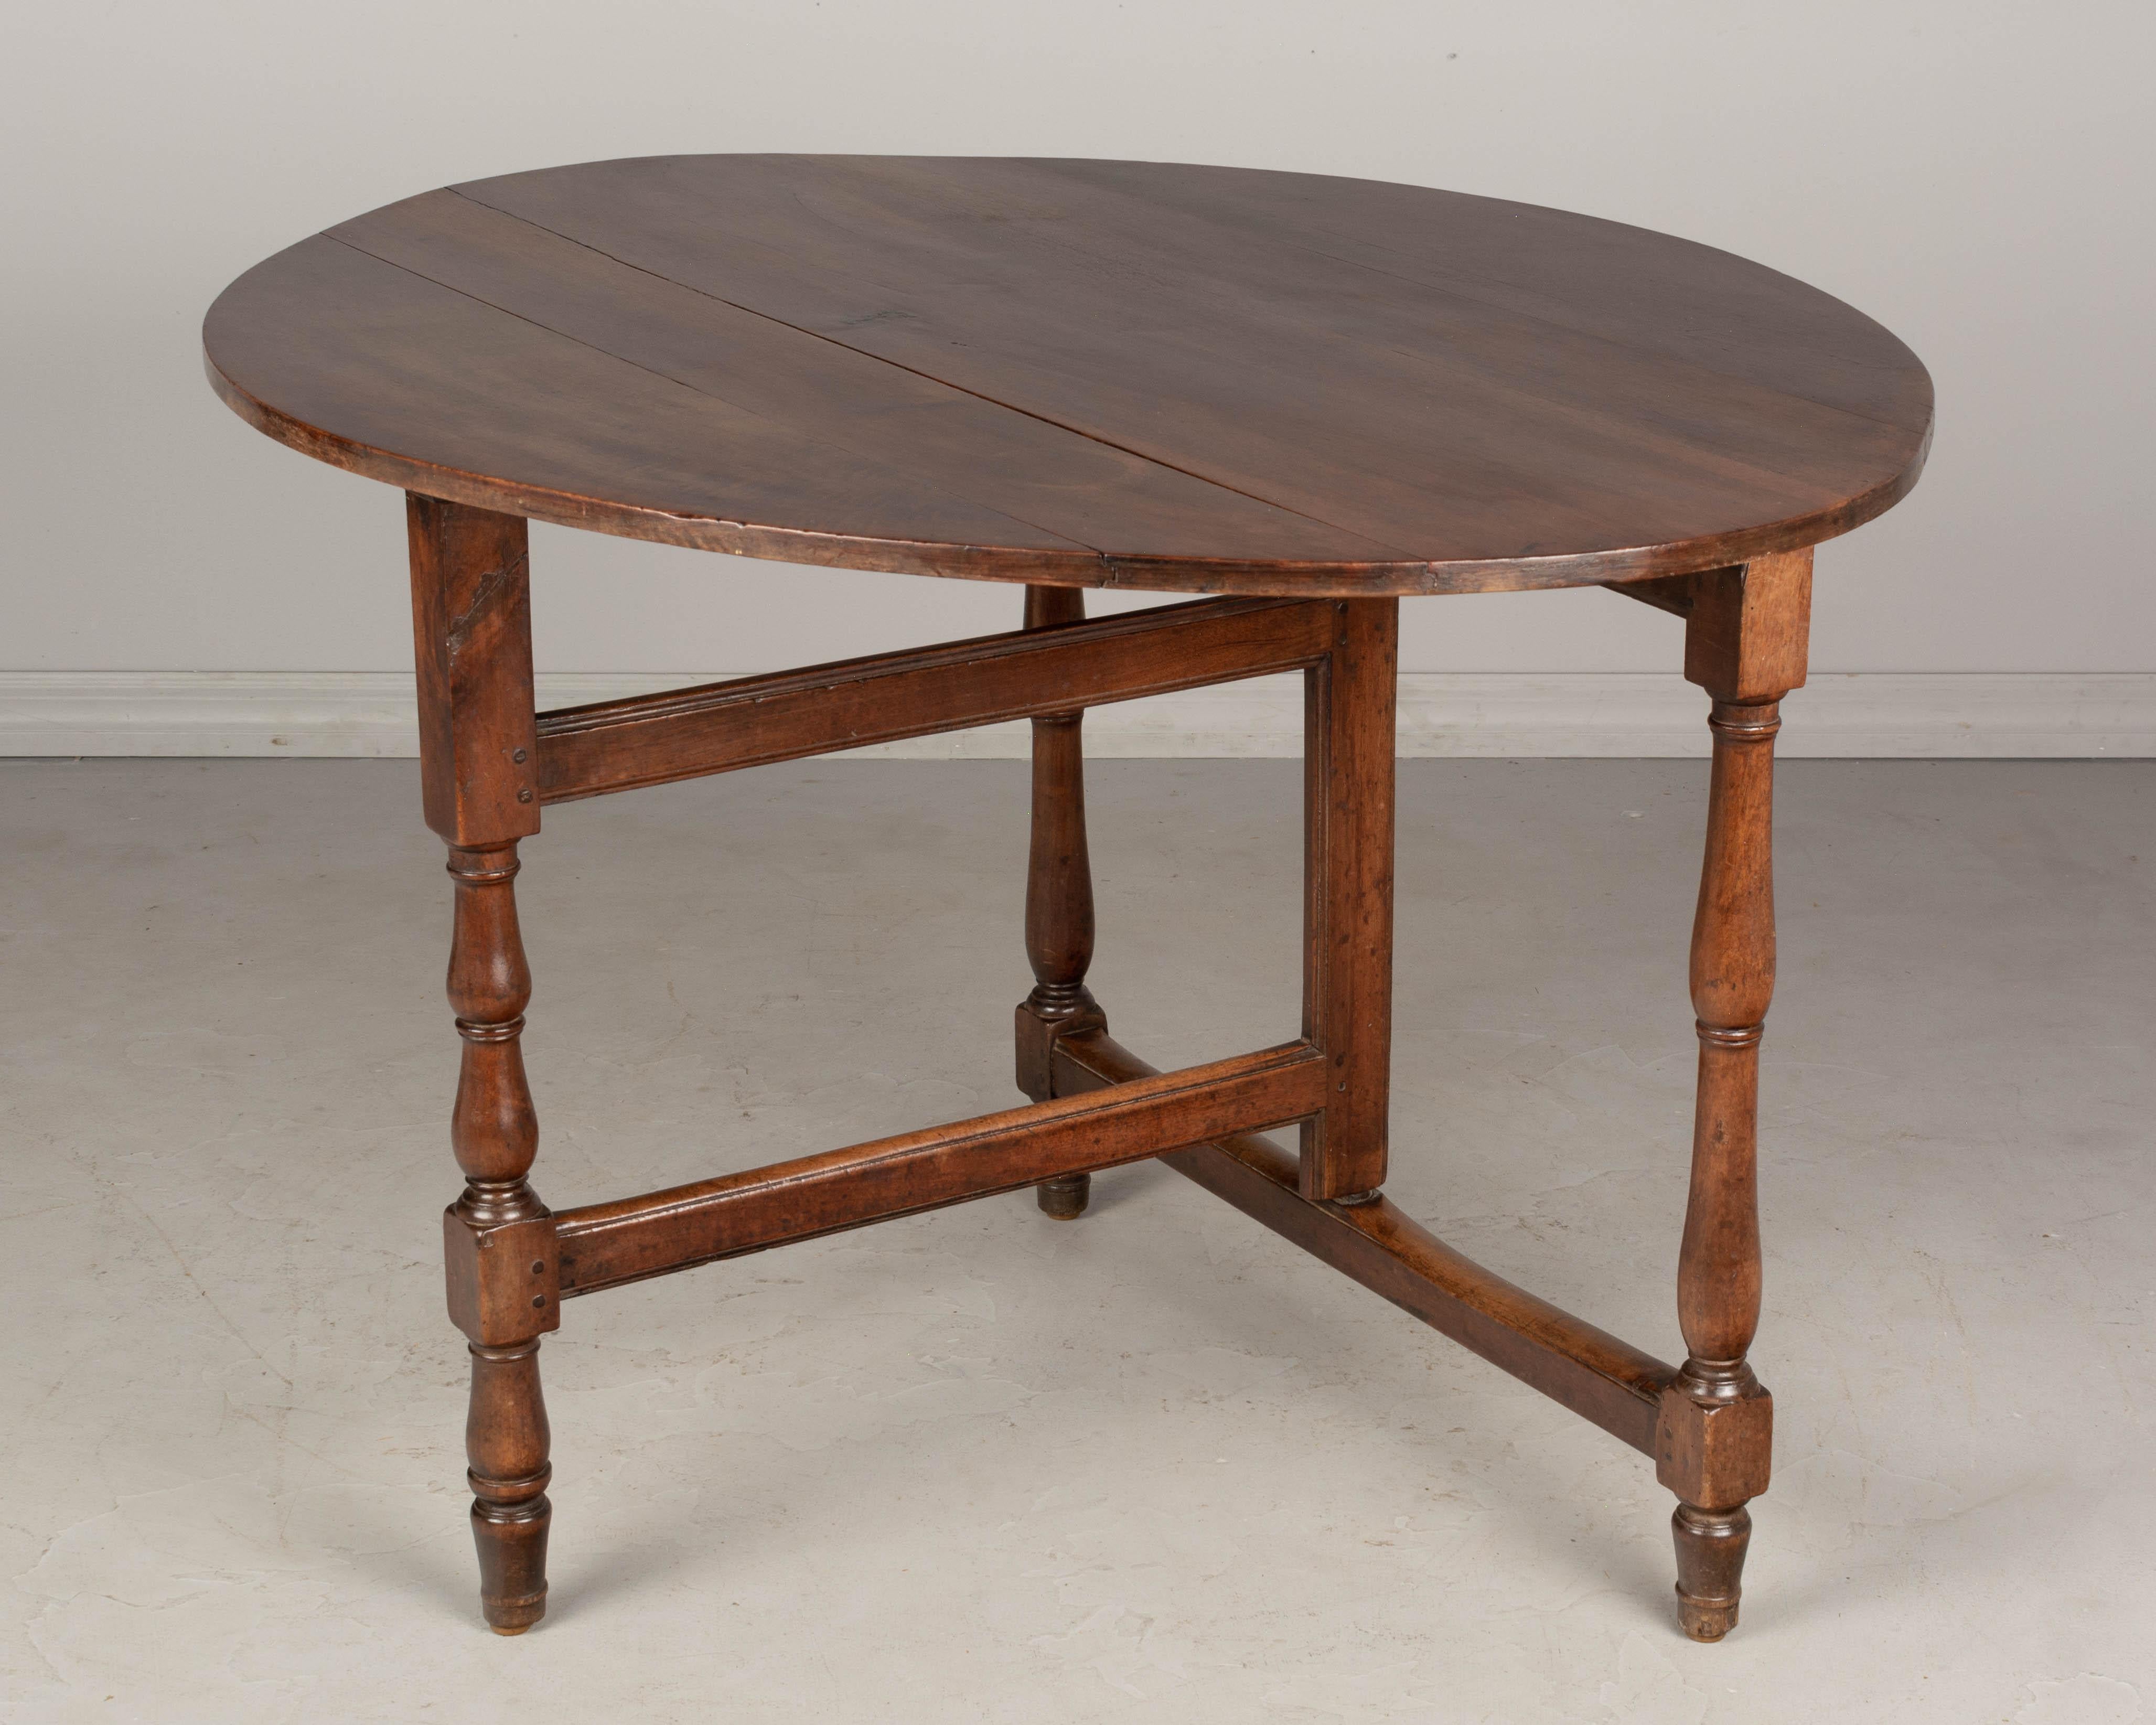 Hand-Crafted 19th Century French Oval Walnut Folding Table